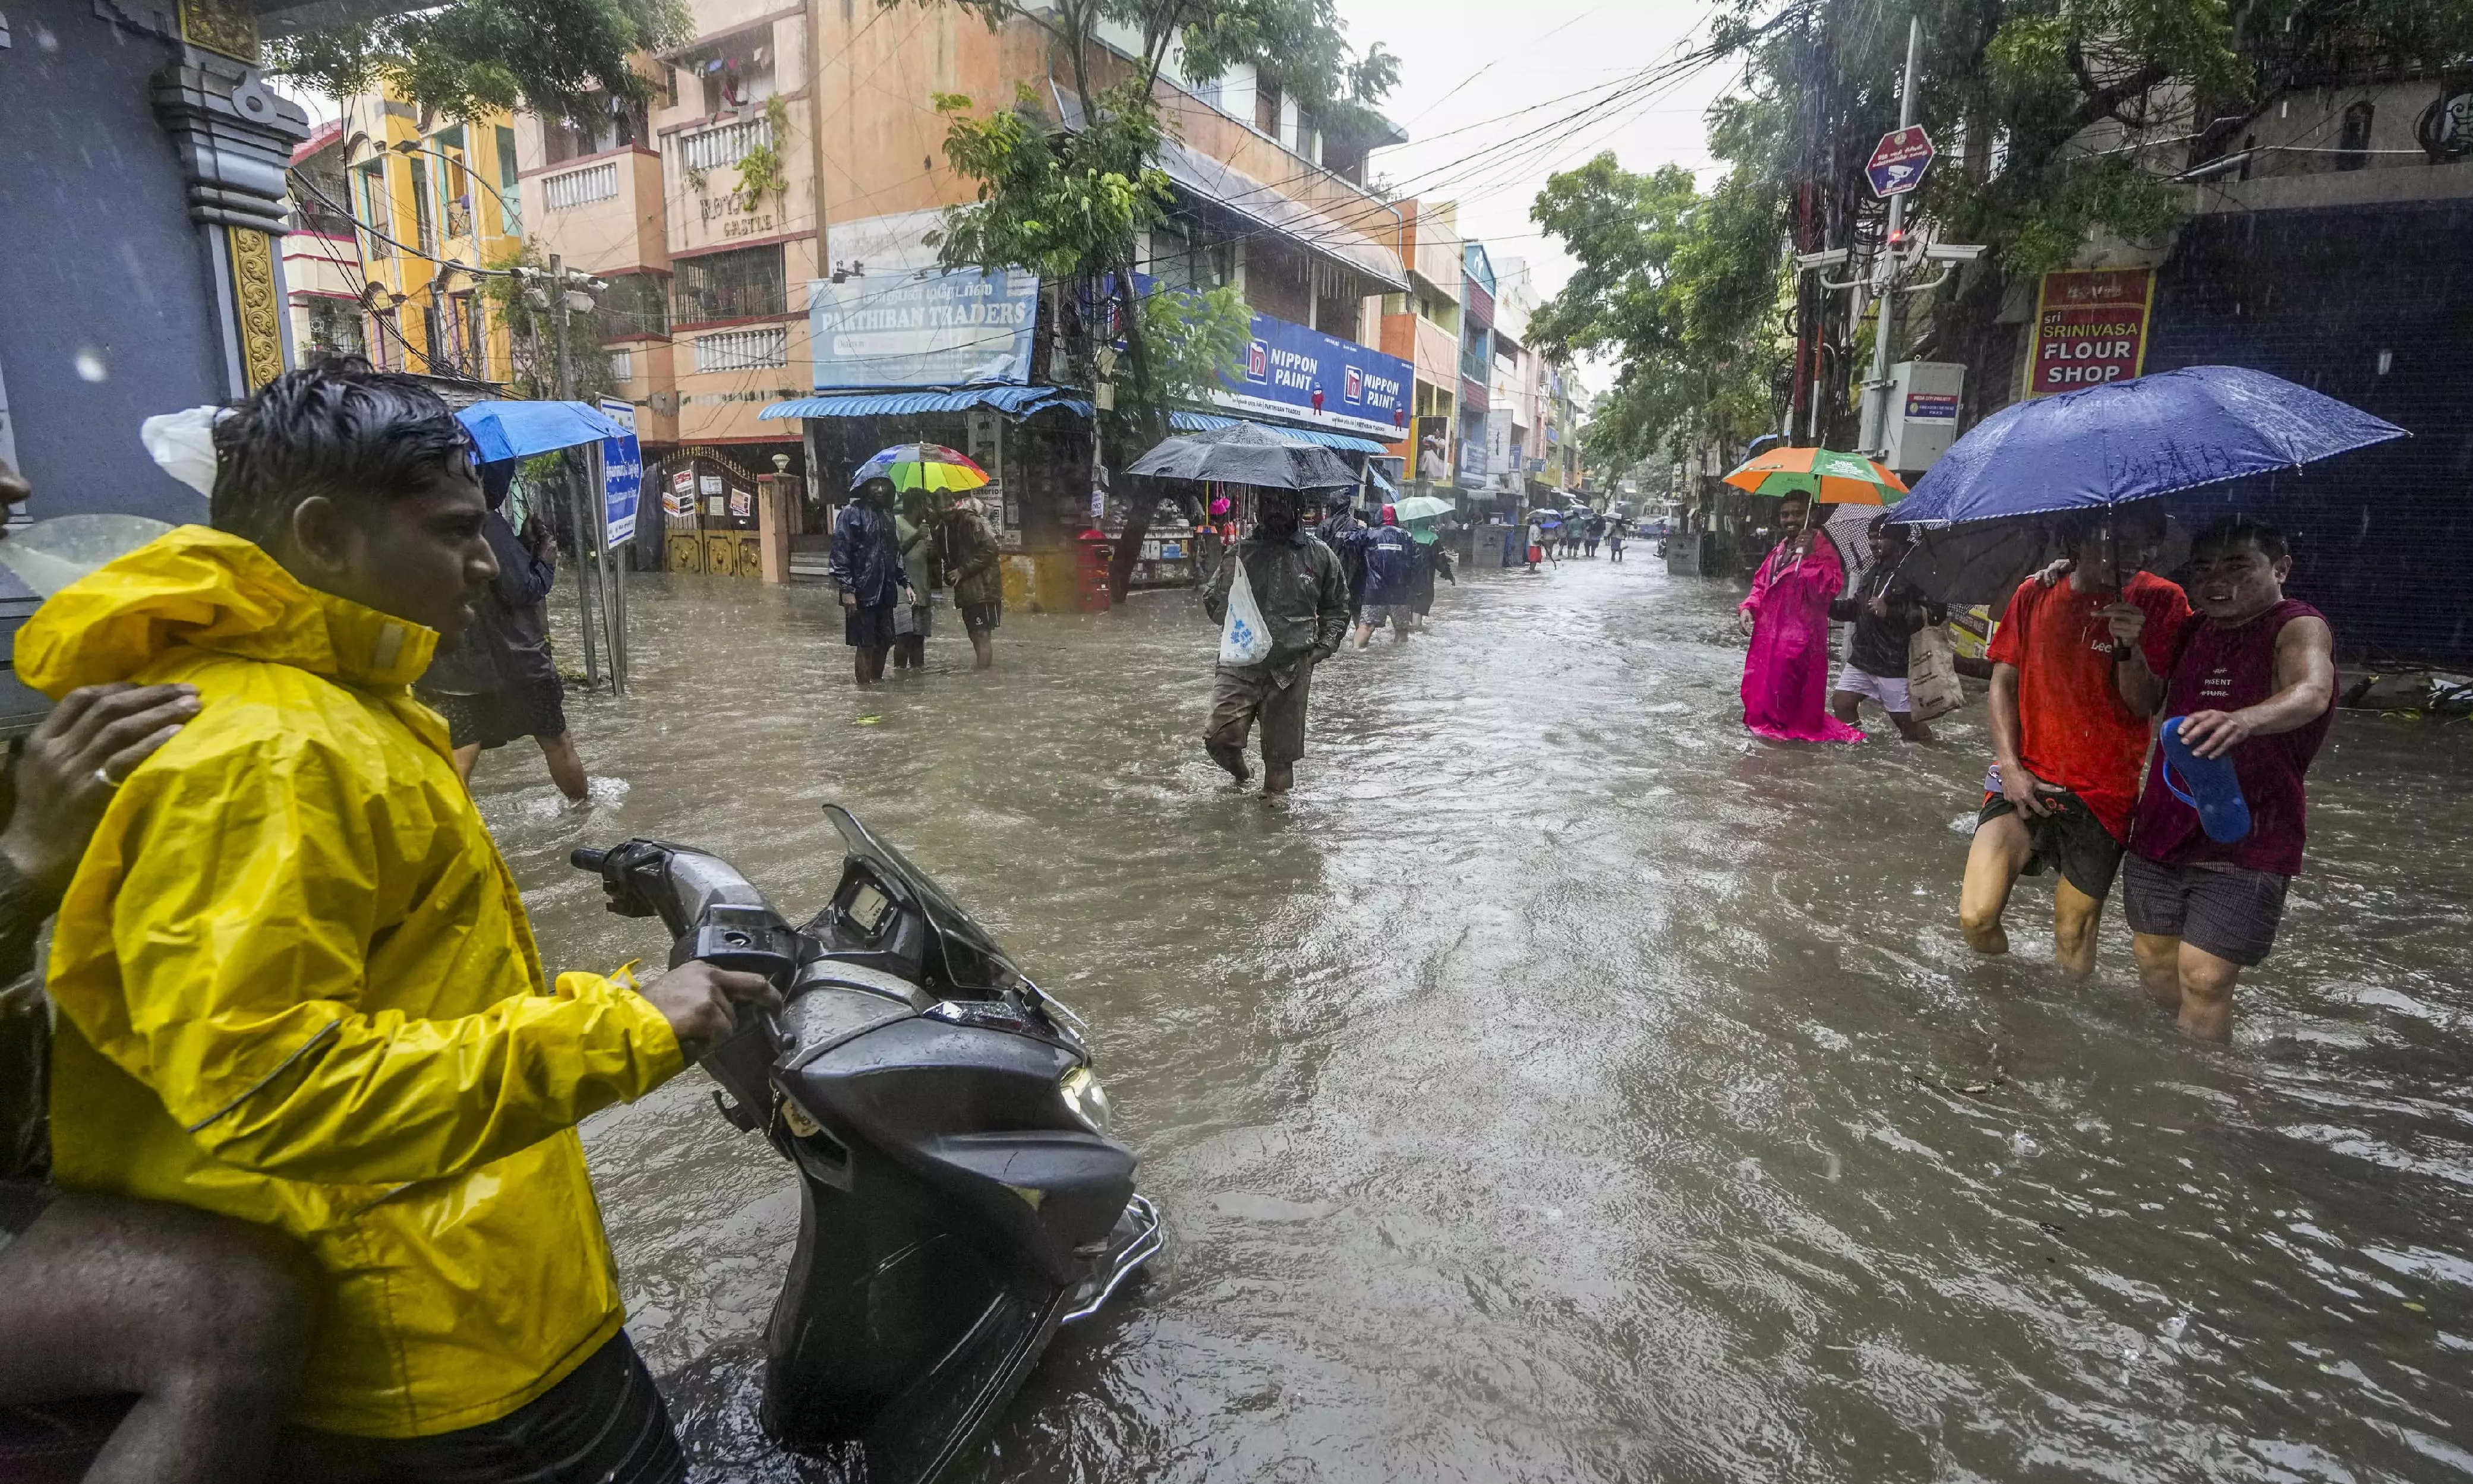 Study shows a 10% or more rise in Southwest monsoon rainfall in 55% of Indian sub-districts